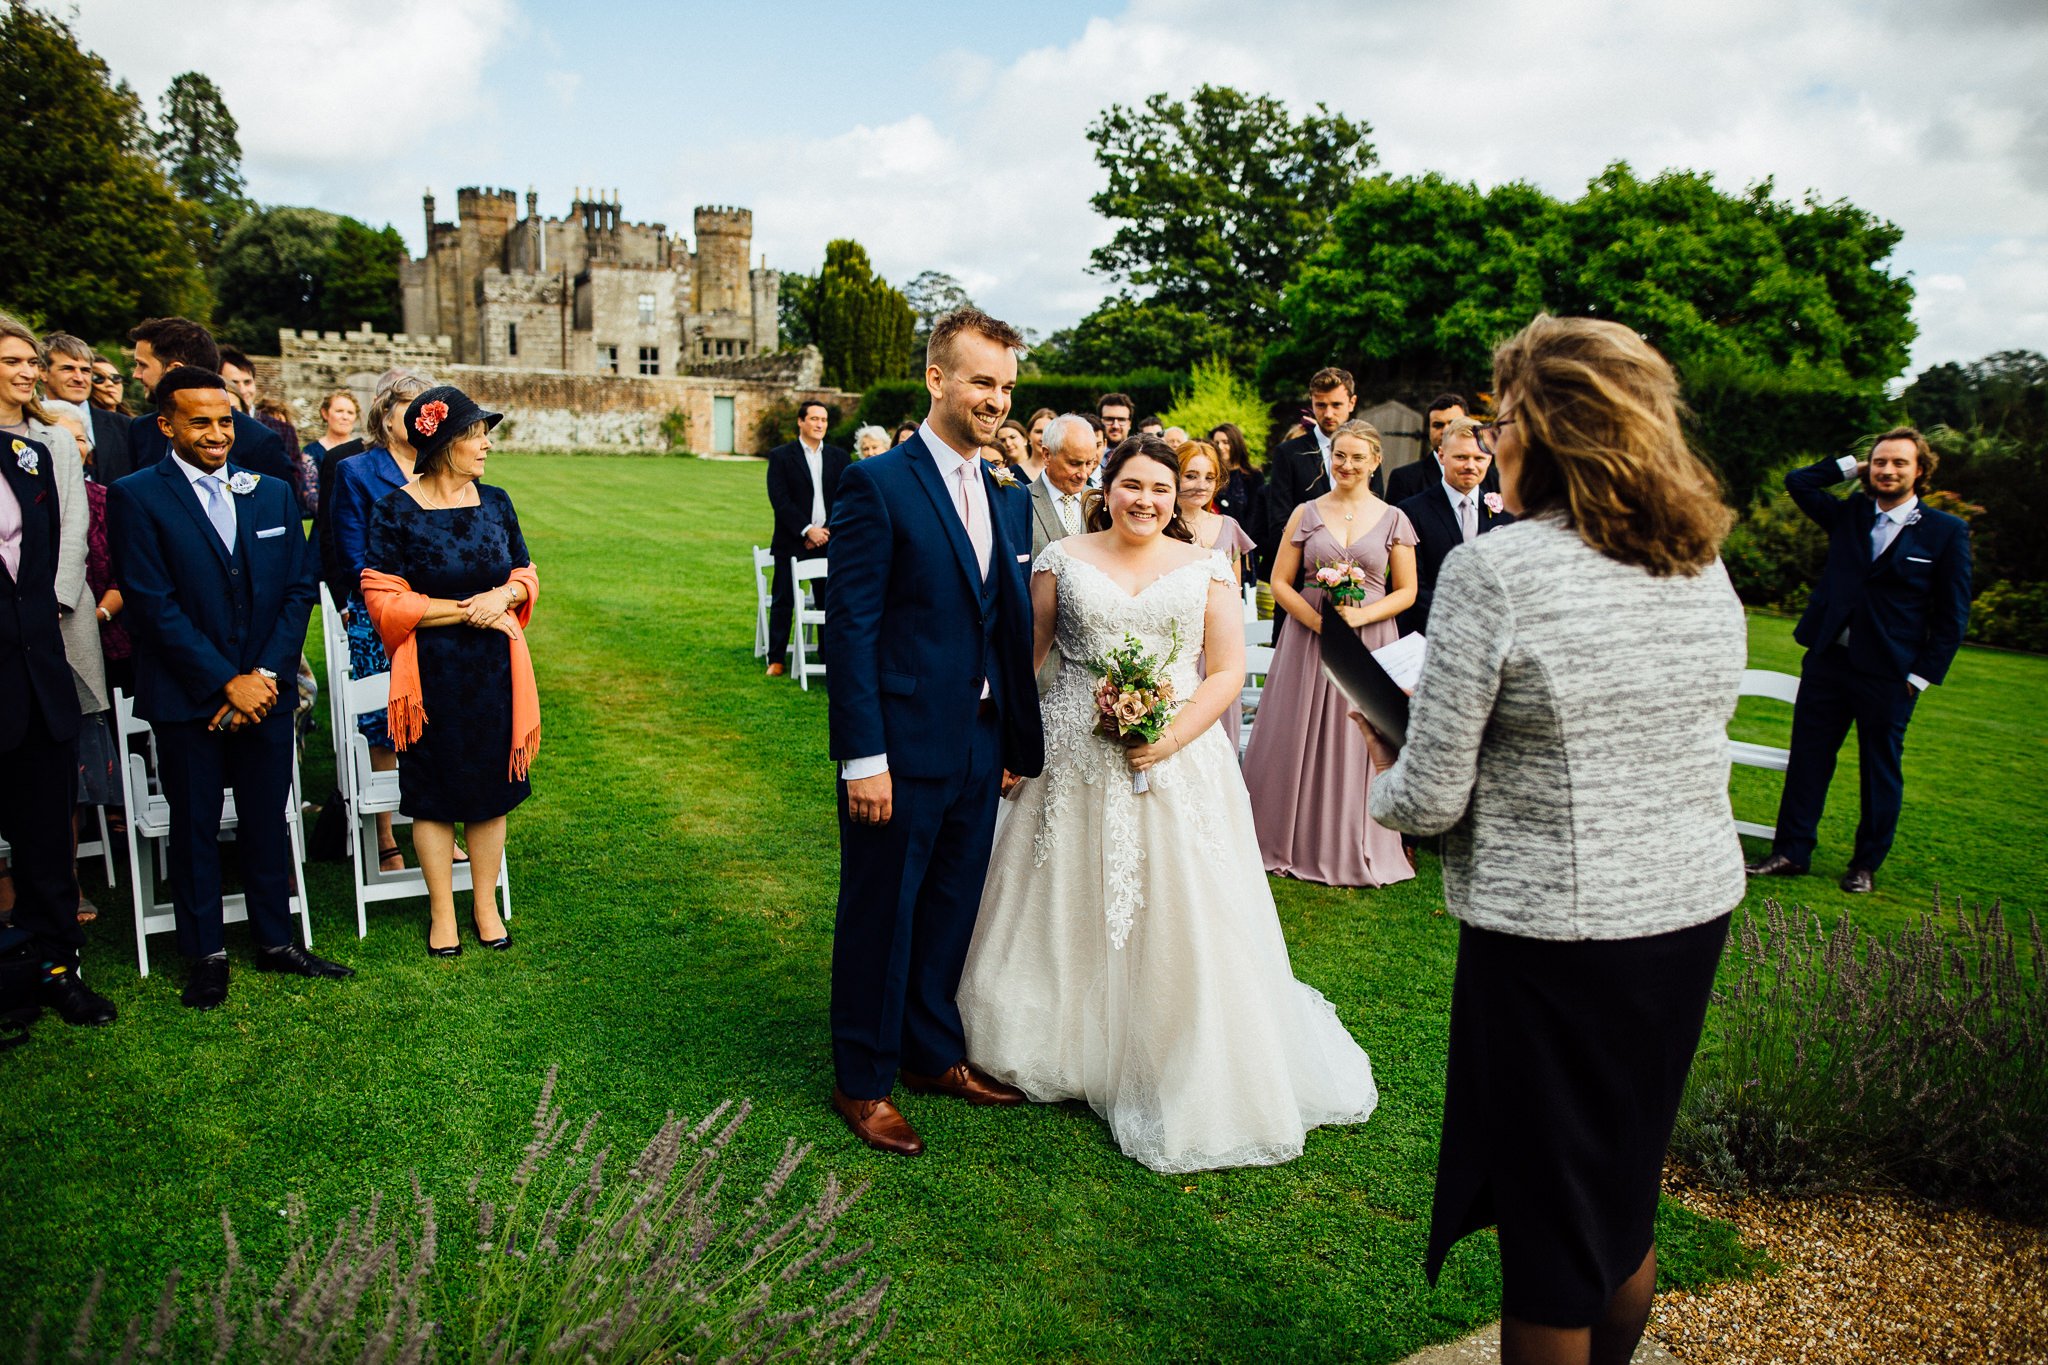  Wedding ceremony in the walled garden at Wadhurst Castle 